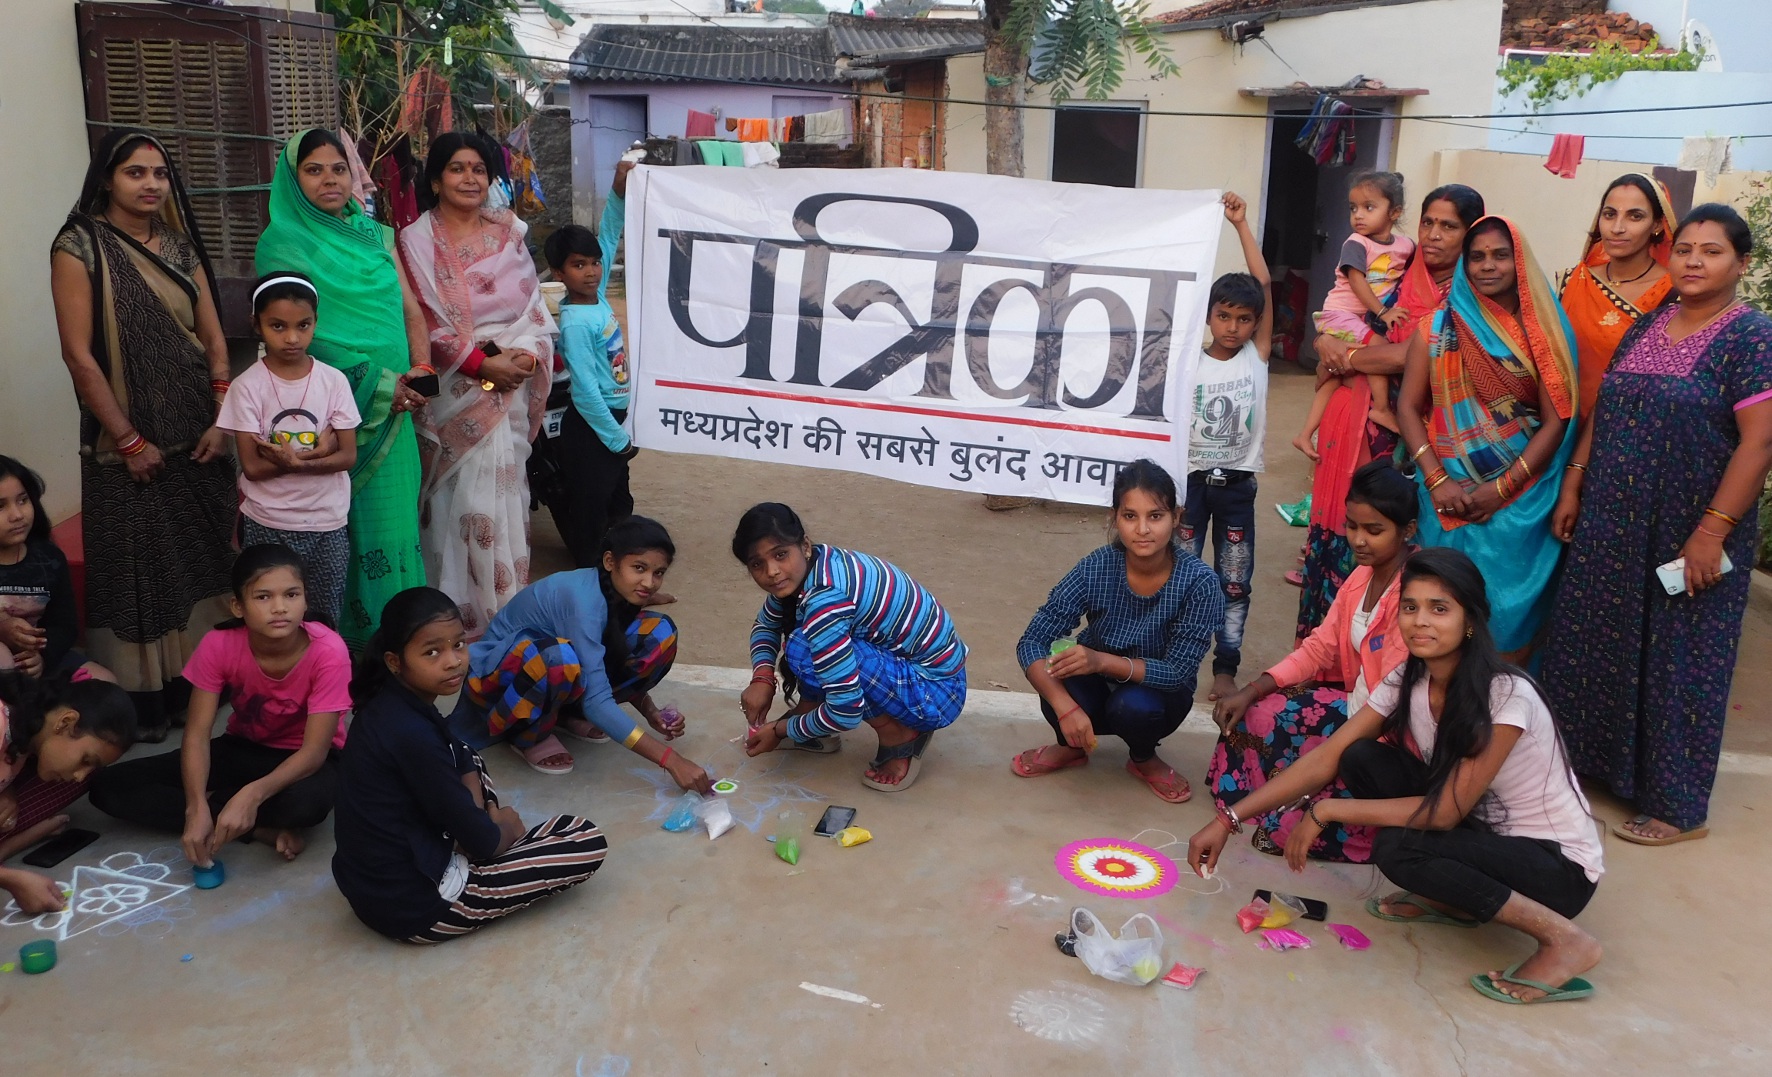 Told teenage girls how to decorate Rangoli at home